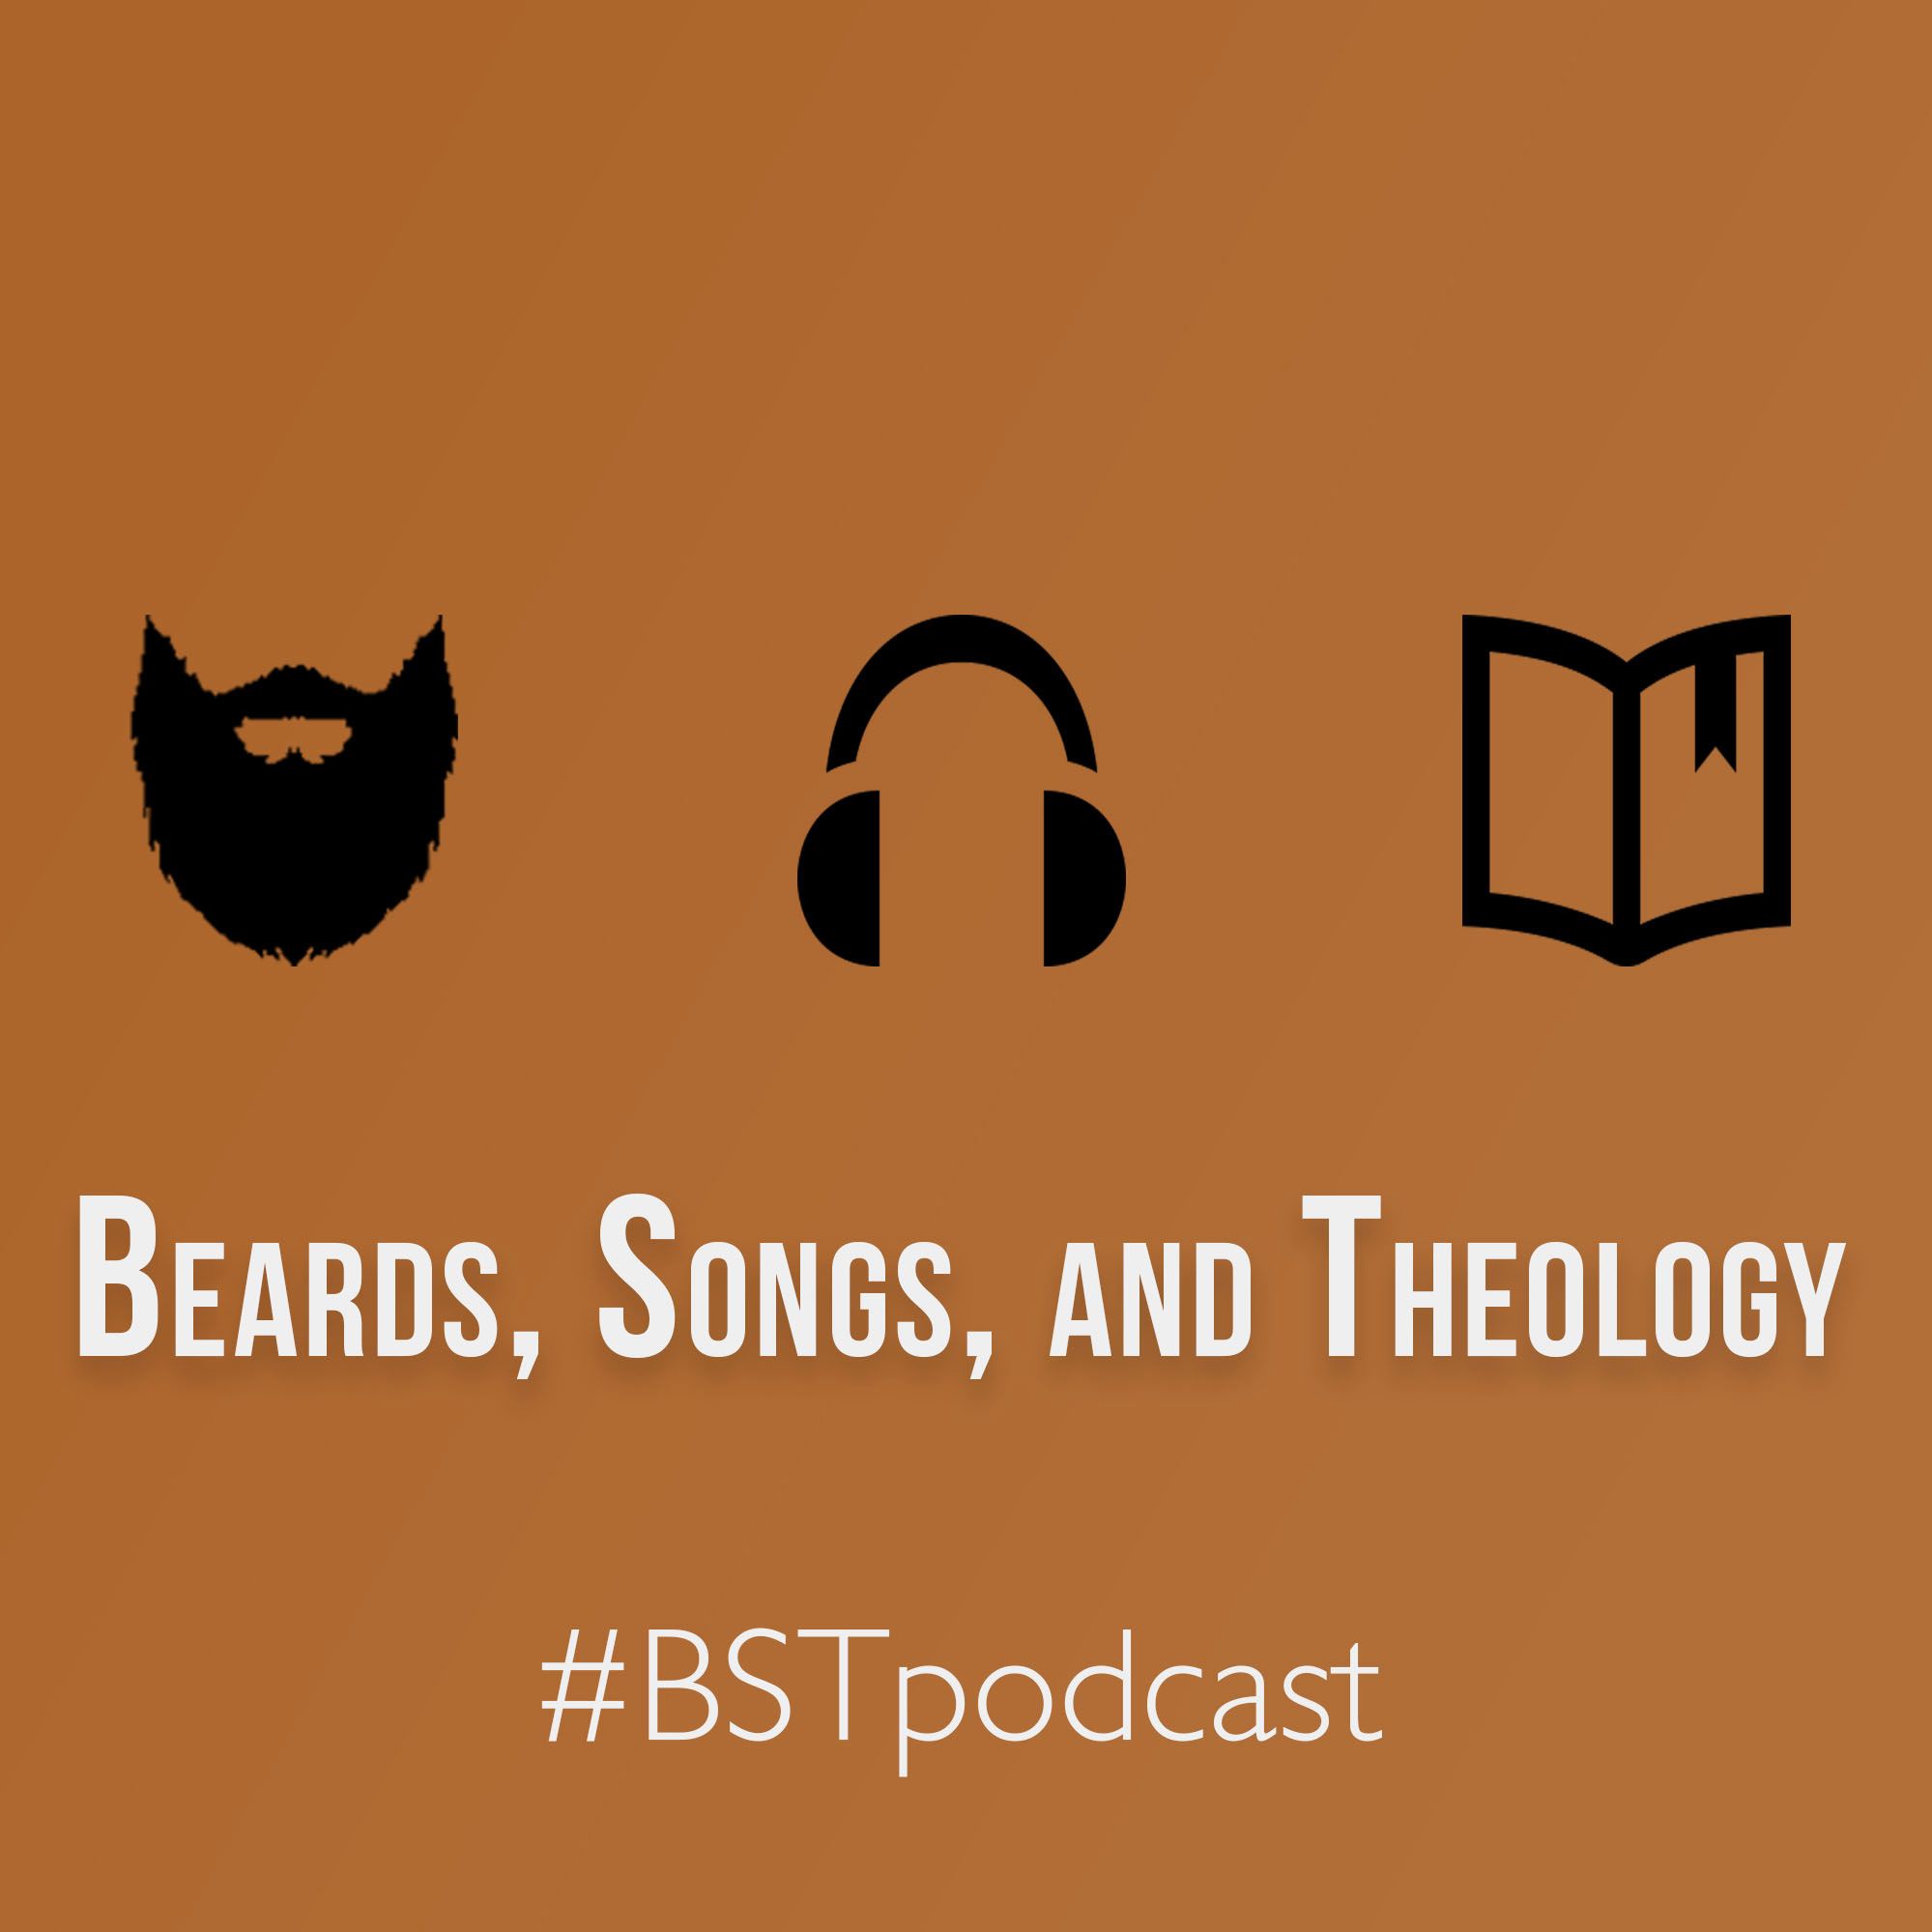 Beards, Songs, and Theology